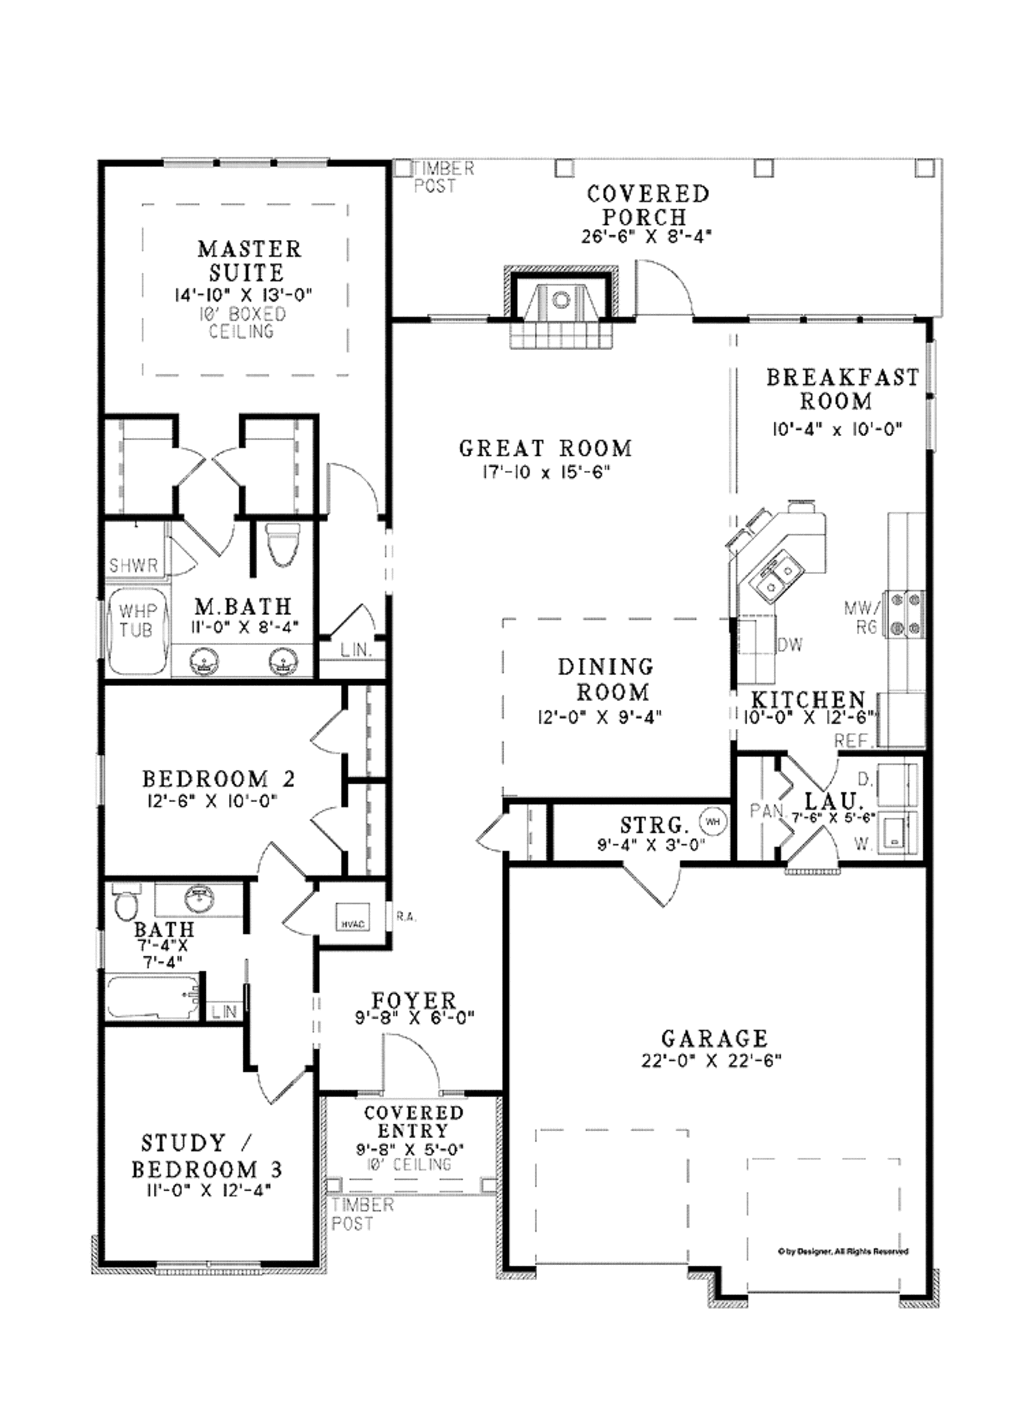 country-style-house-plan-3-beds-2-baths-1738-sq-ft-plan-17-3356